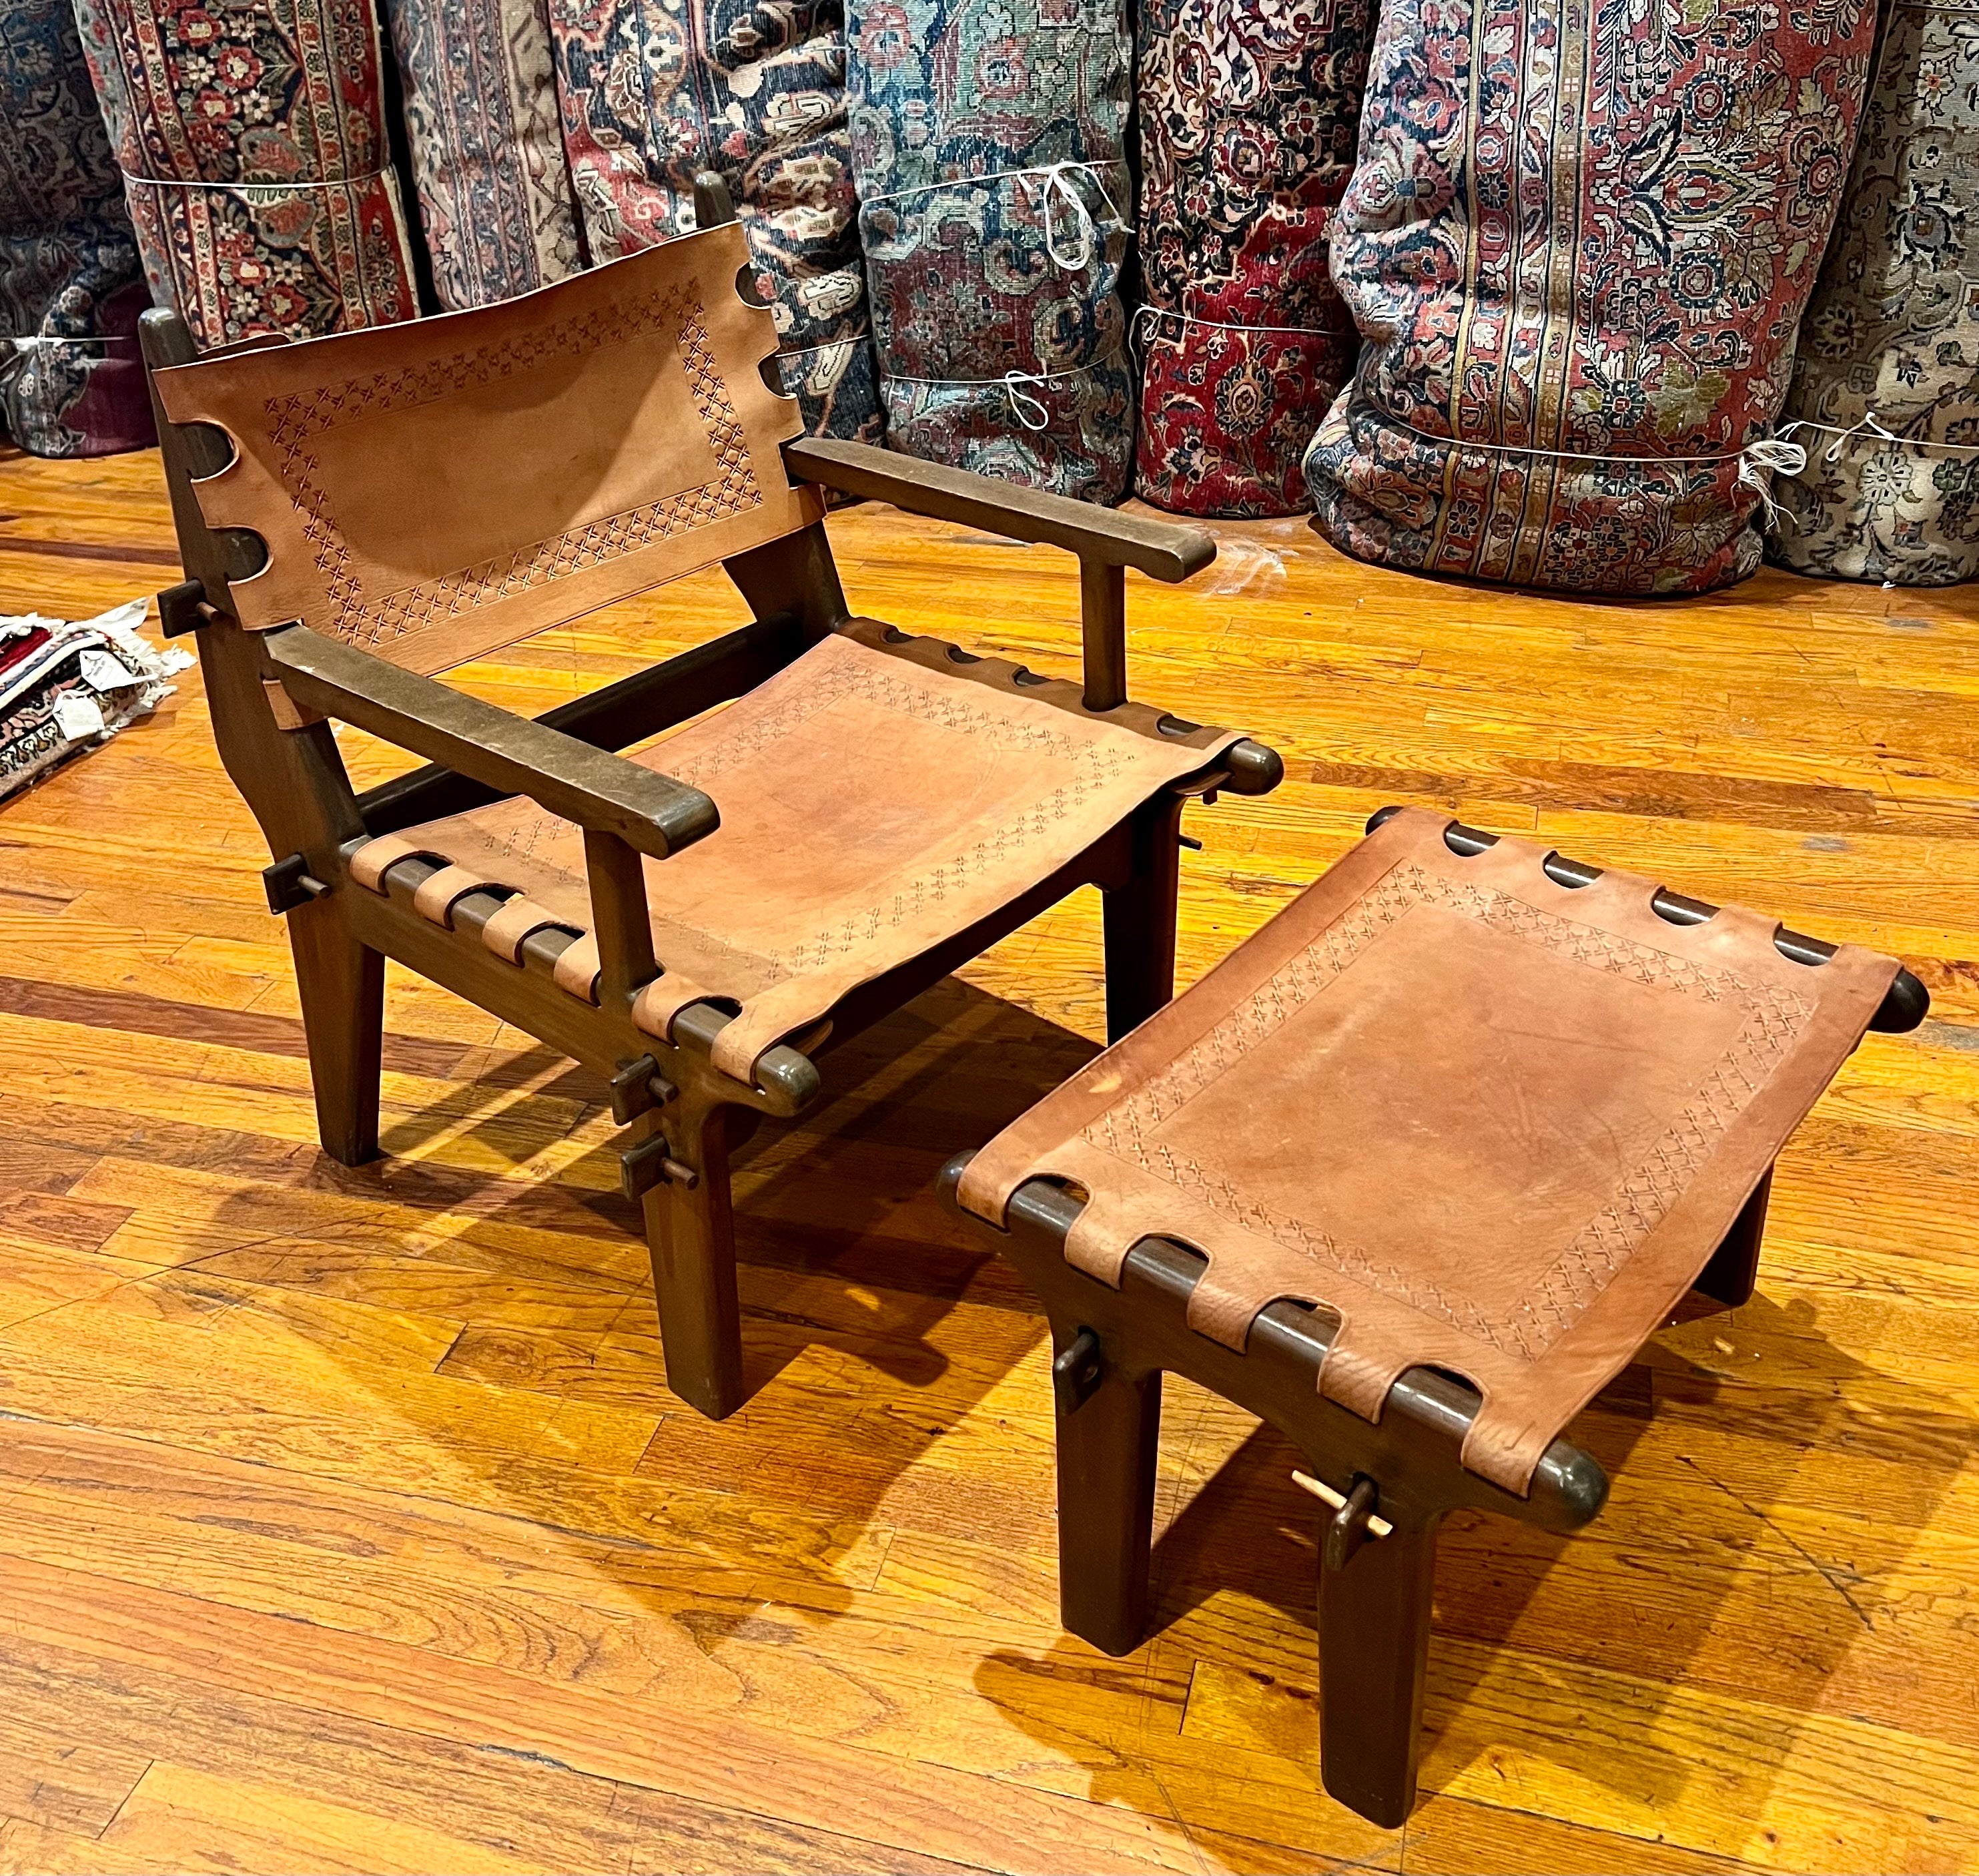 
Beautiful aesthetically captivating this stunningly unique mid-century modern lounge armchair and ottoman by Ecuador’s Angel Pazmino is the epitome of functional art. Crafted by artisans from tropical hardwoods with hand-tooled leather slings this